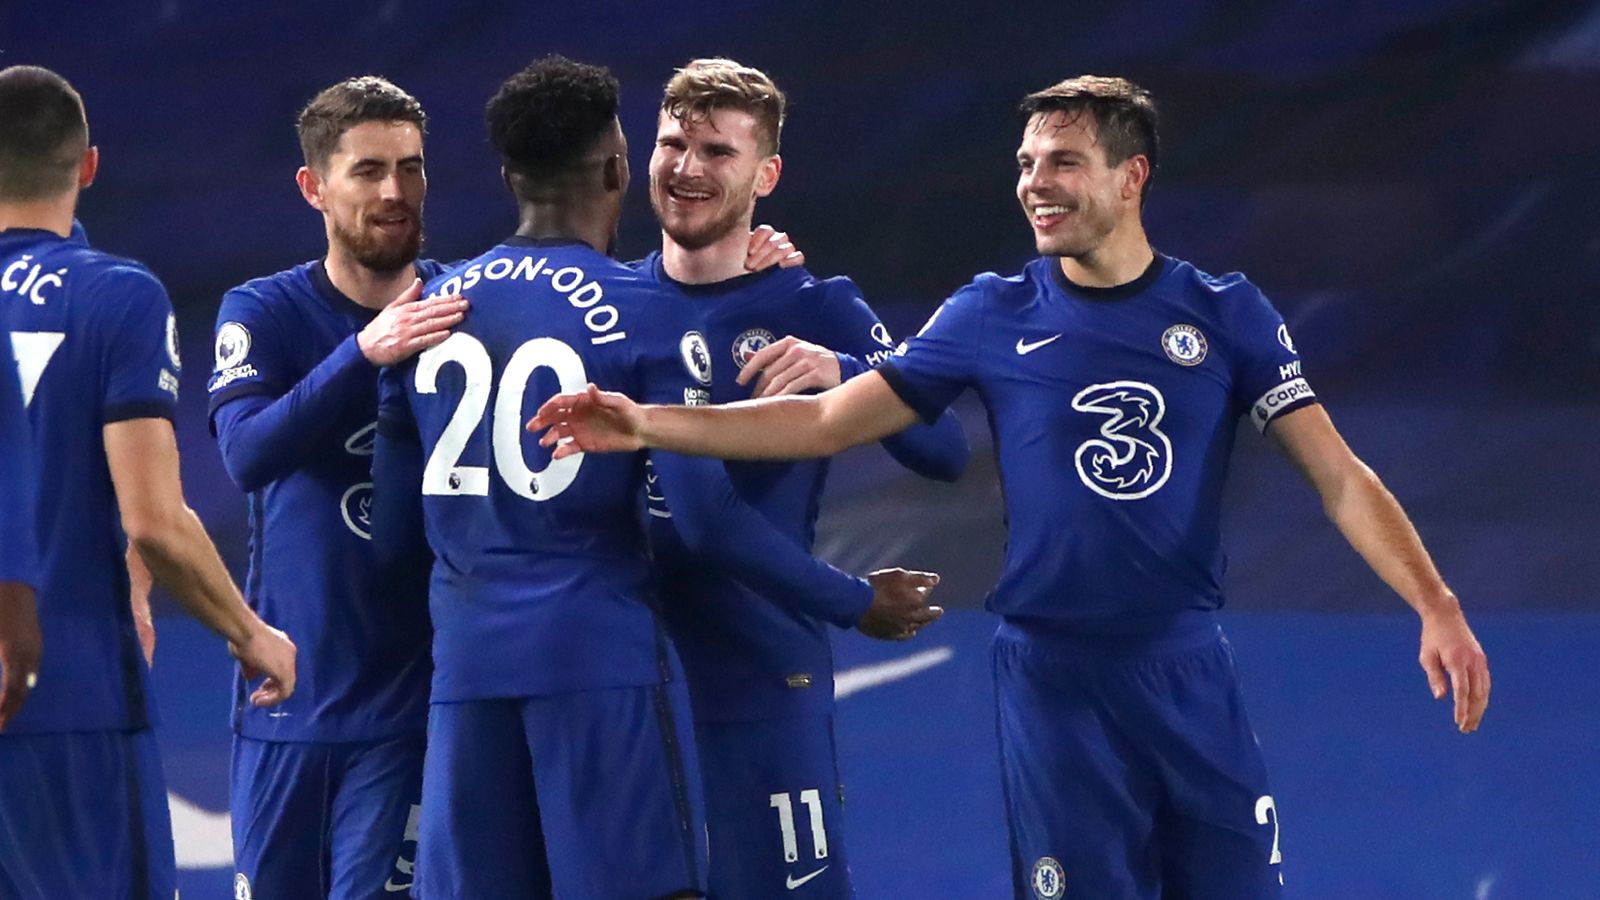 43 Best Pictures Chelsea Fc Sports Medicine - Everton vs Chelsea Tips and Odds - Matchday 12 EPL 2020 ...